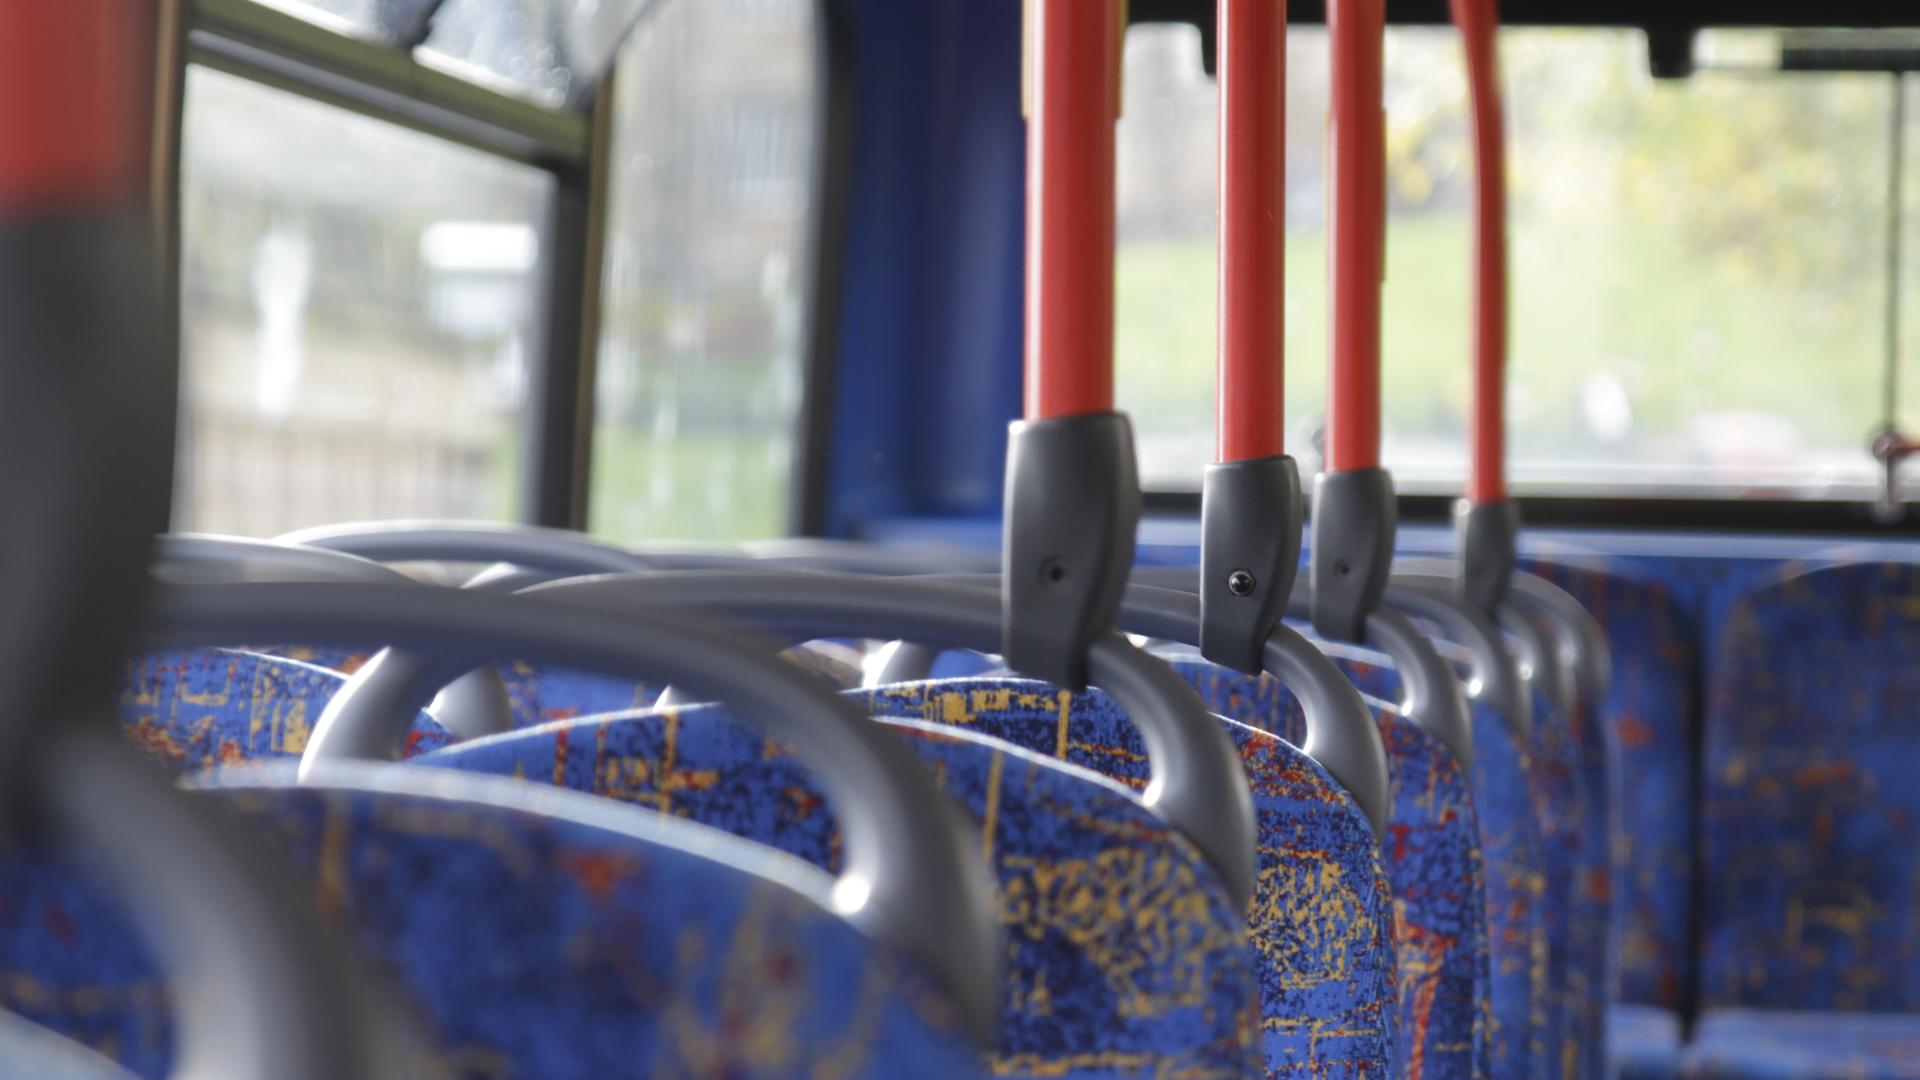 A line of empty seats on a bus